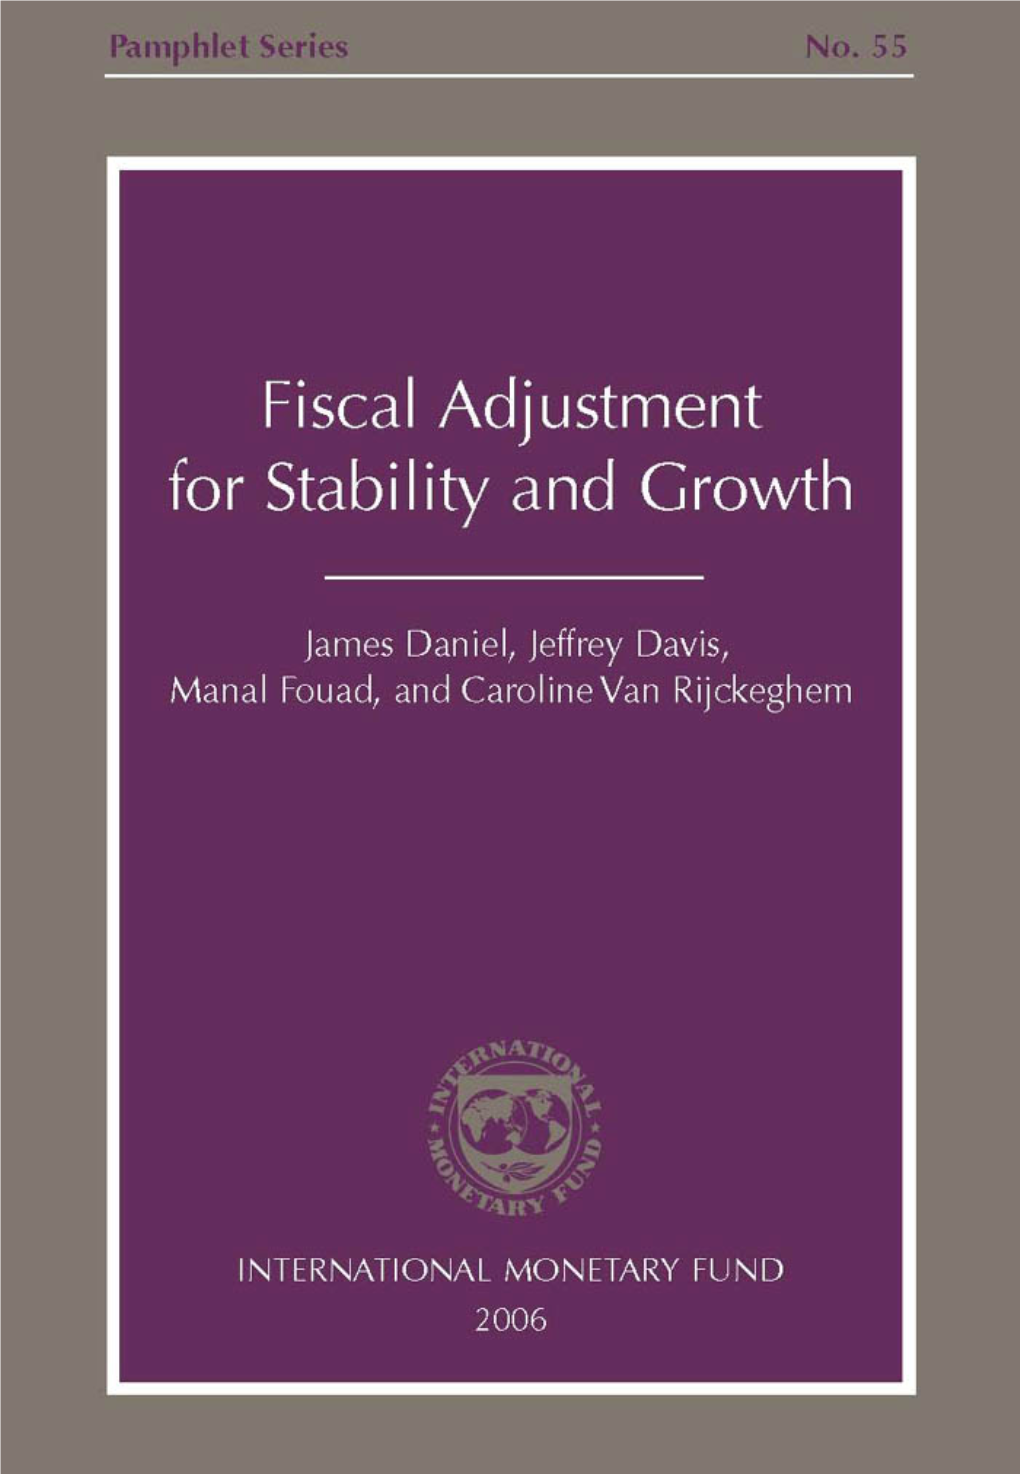 Fiscal Adjustment for Stability and Growth